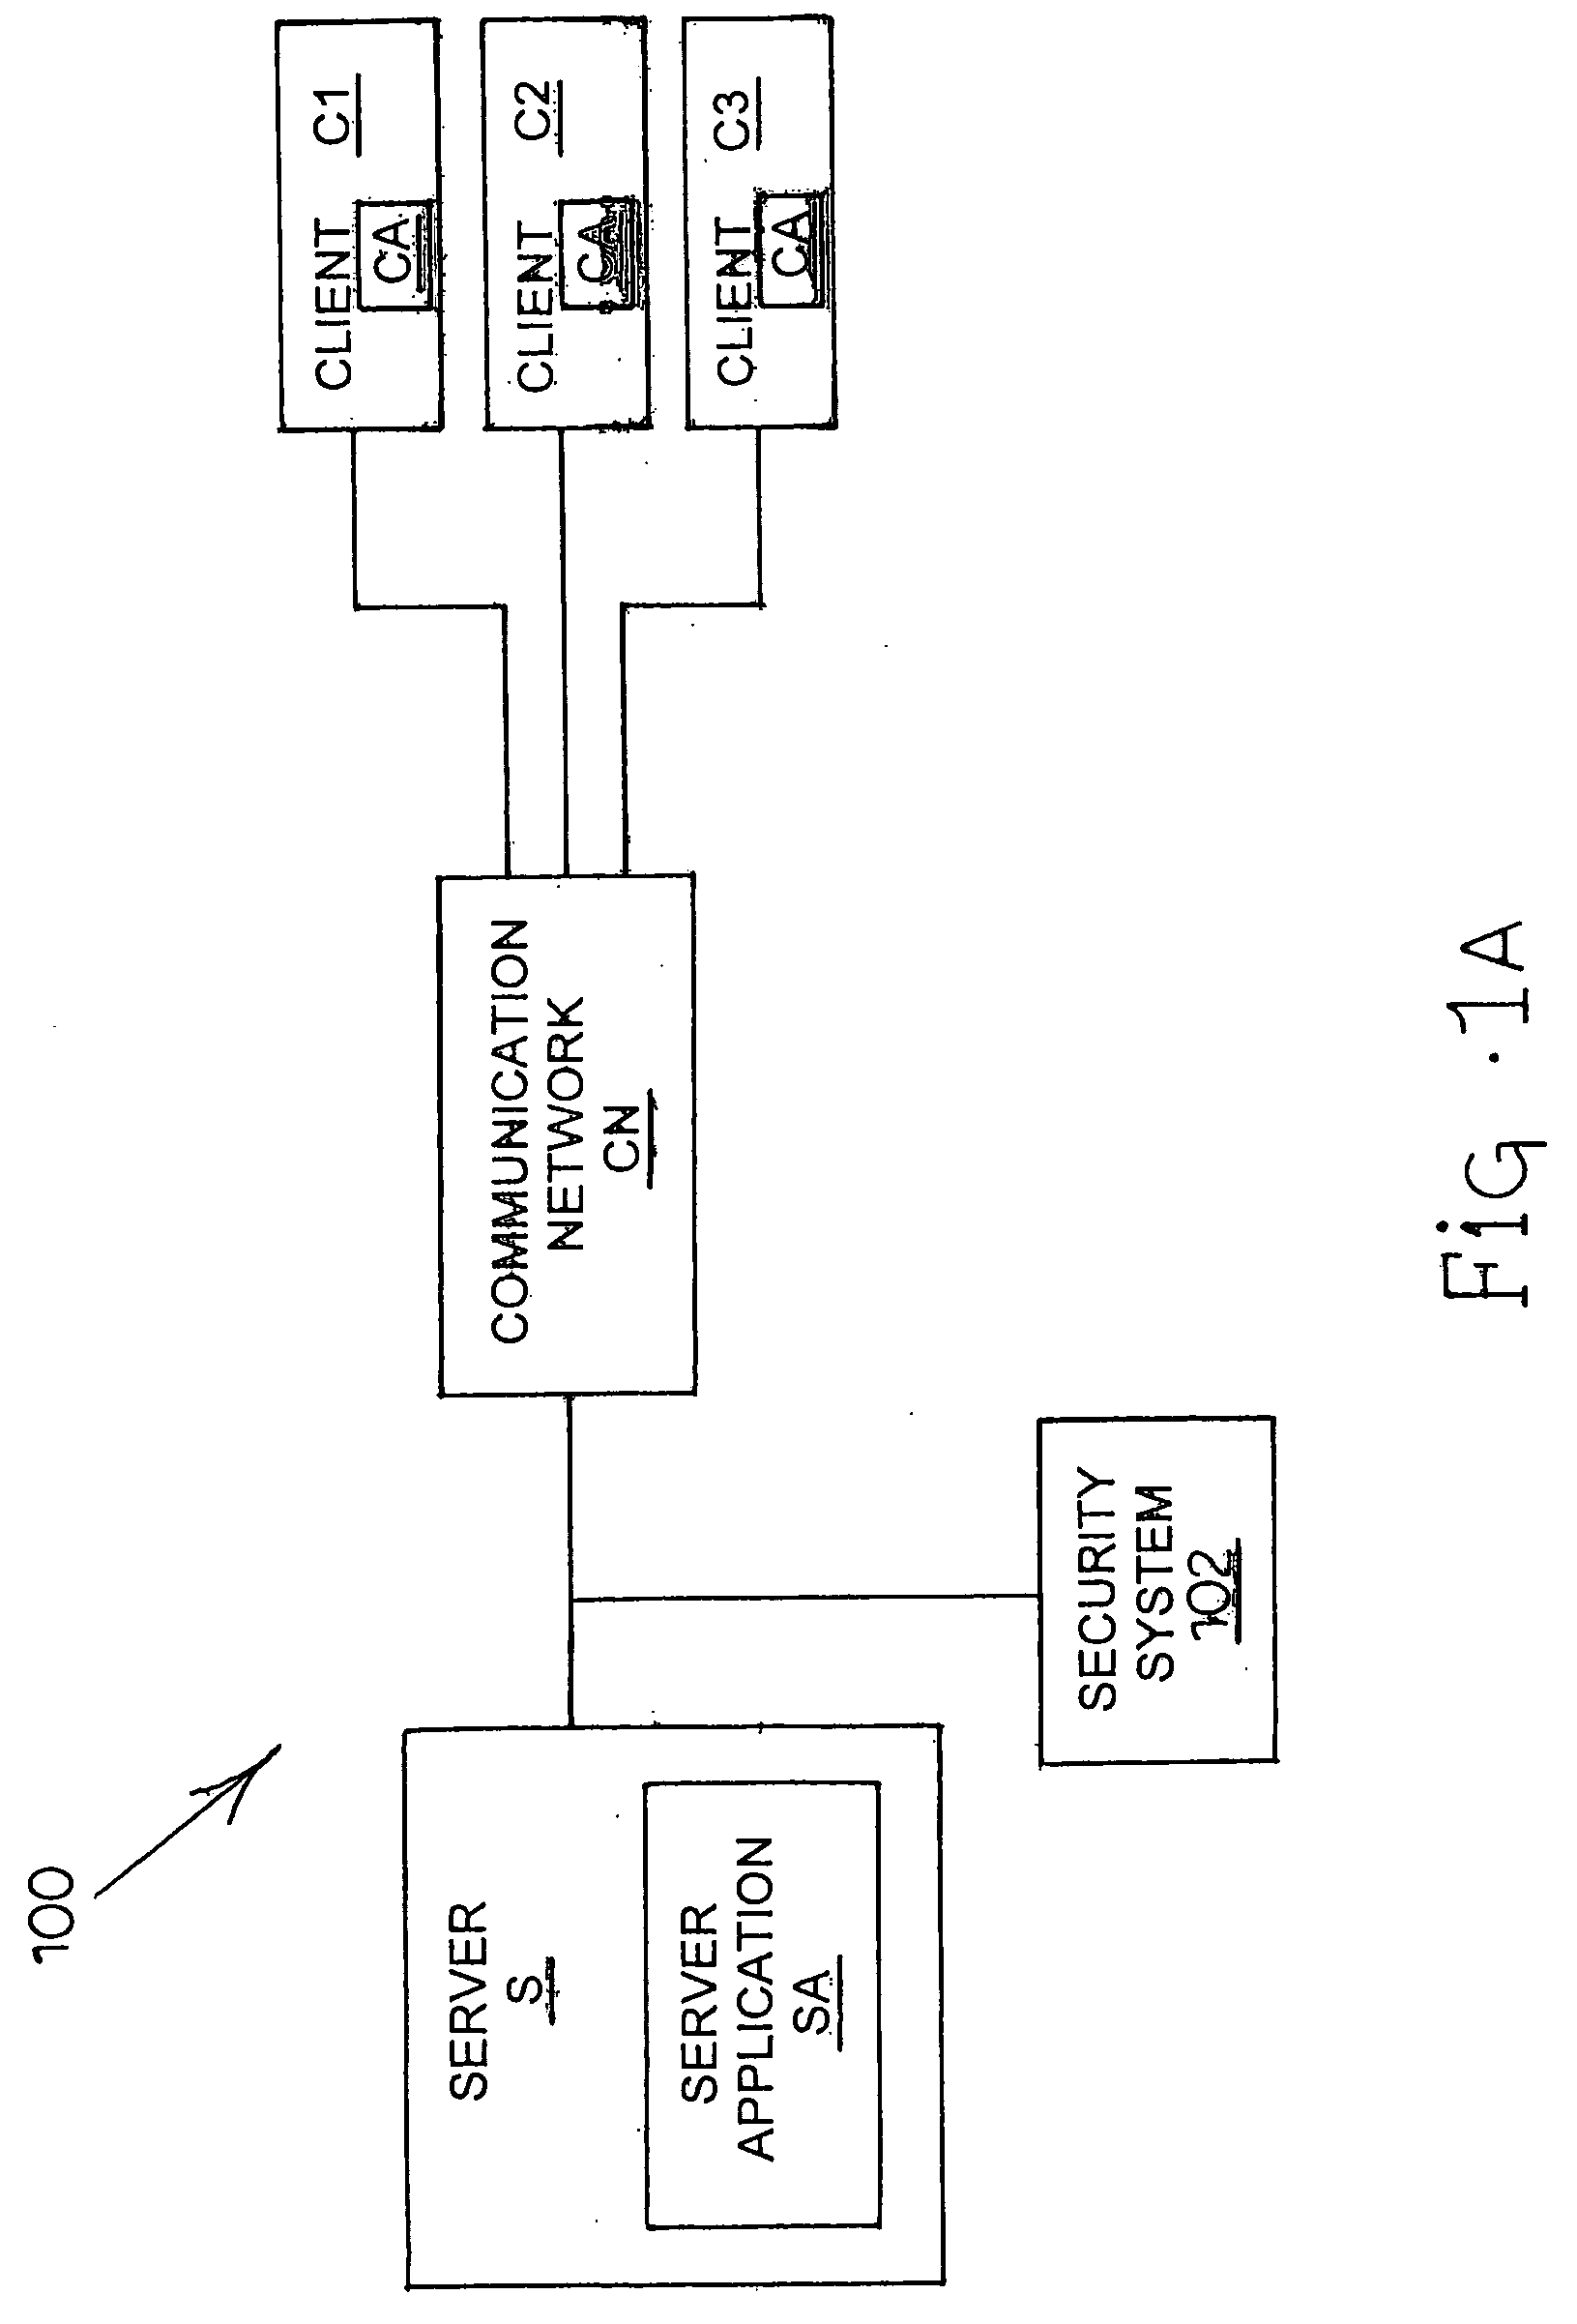 Methods, systems and computer program products for monitoring a server application